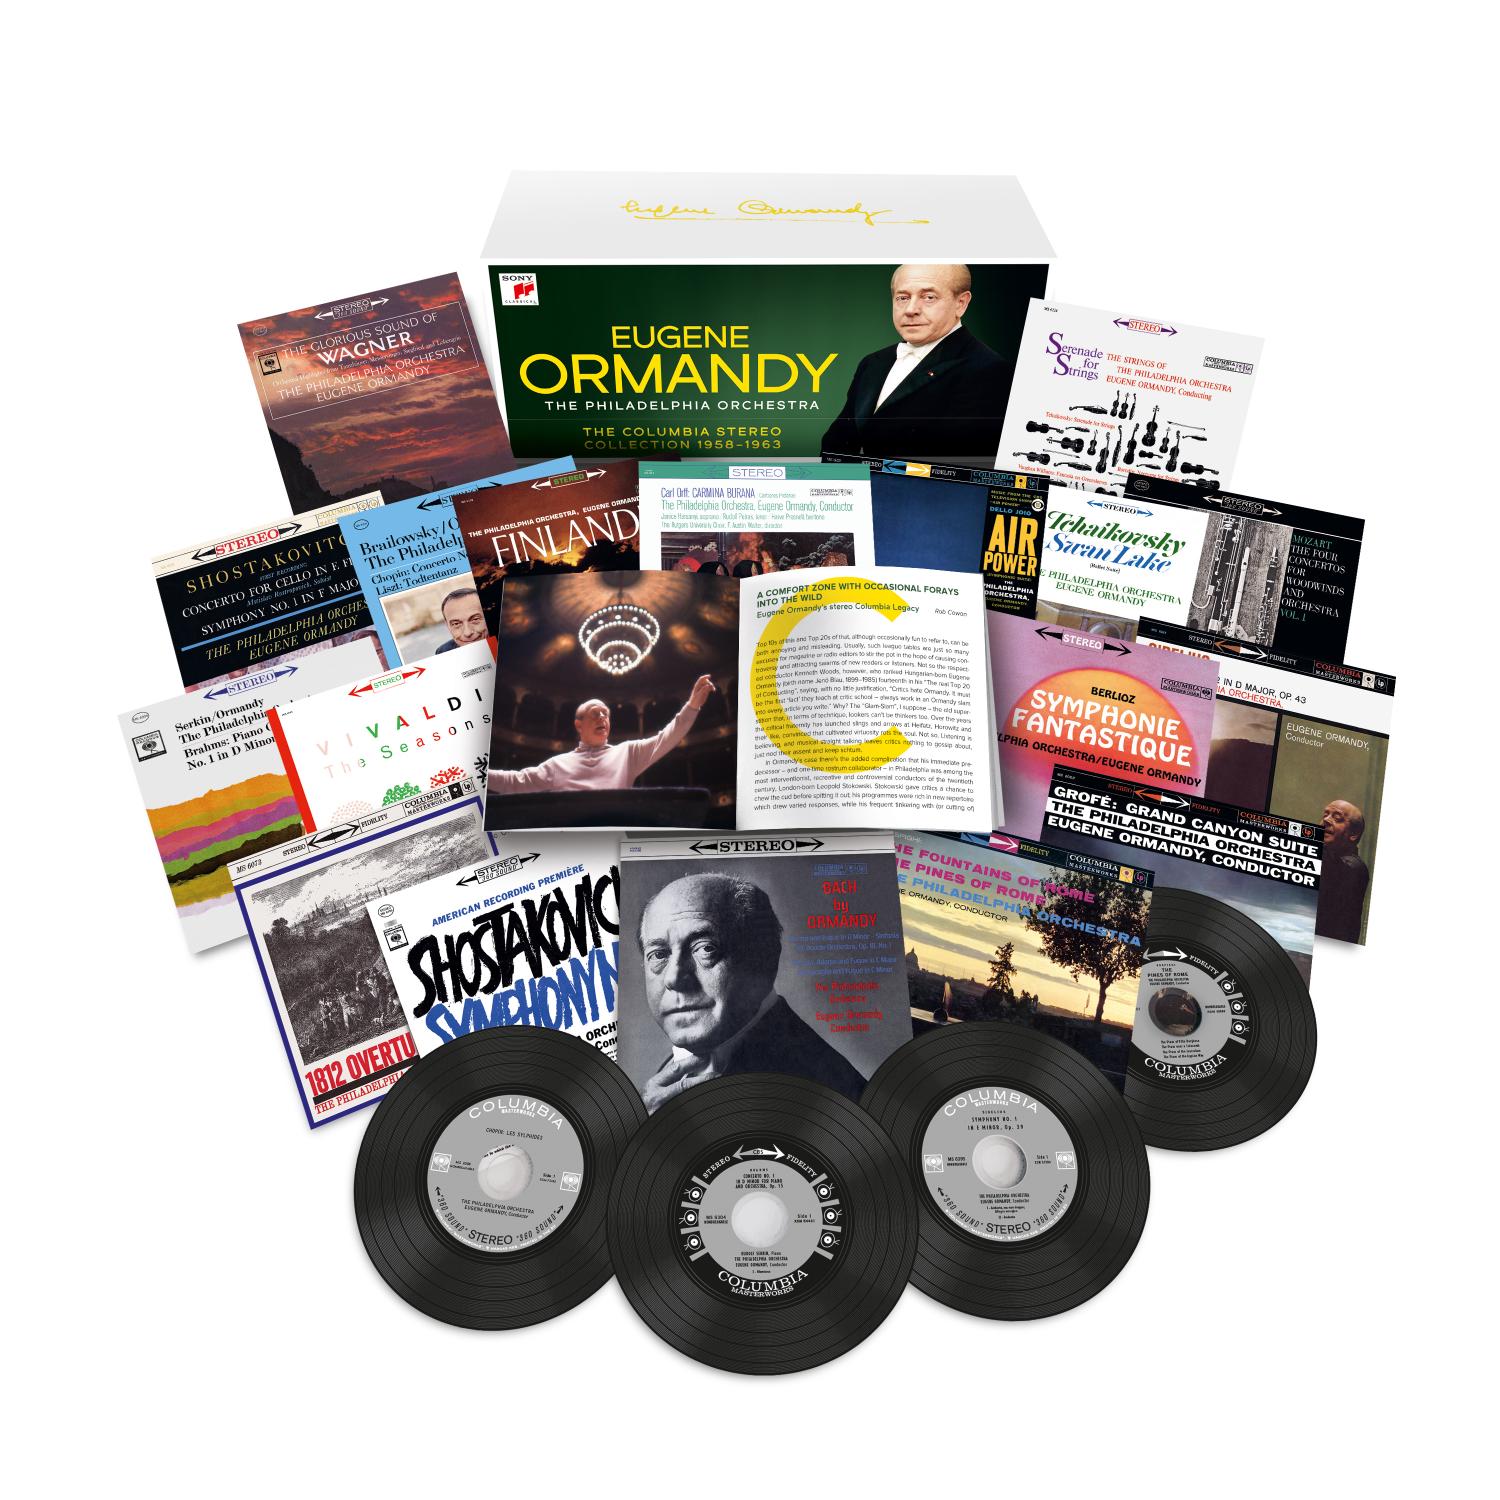 Eugene Ormandy - Eugene Ormandy and the Philadelphia Orchestra - The Columbia Stereo Collection